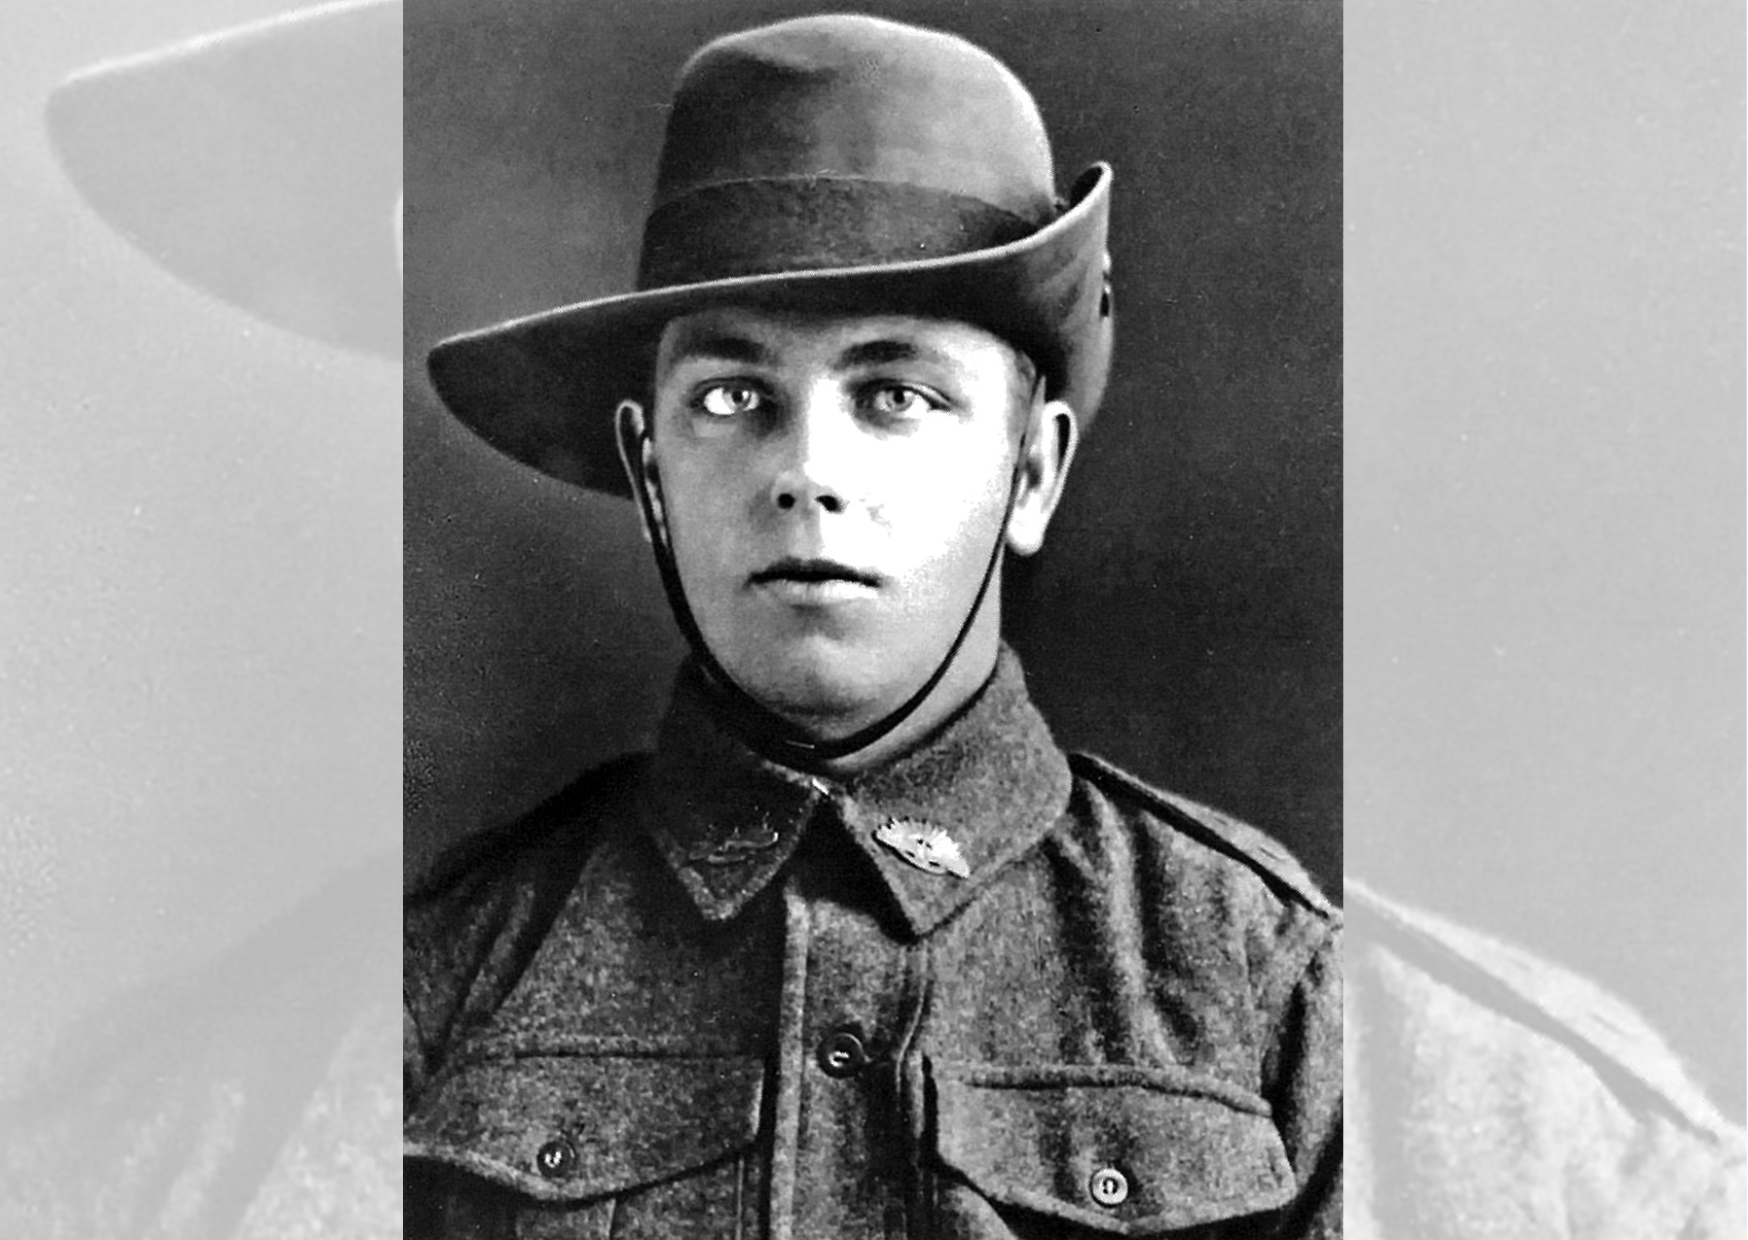 Anzac Day: Irving Thompson, he was only a boy